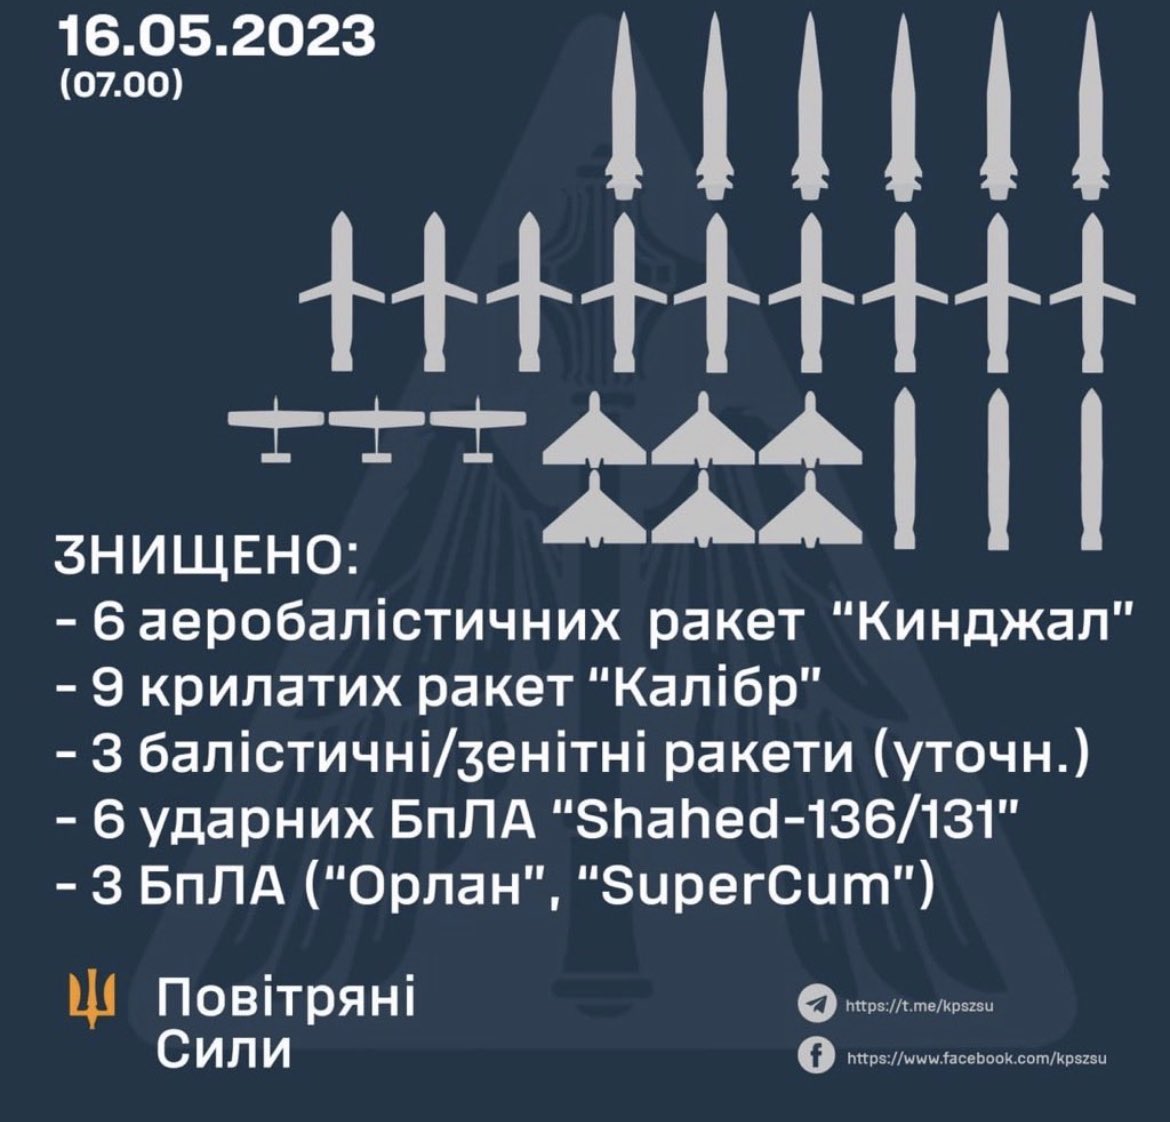 Ukraine has knocked down 7 Kinzhal hypersonic missiles, 6 of them in one night. The pride&joy of #Russia’s military industry, not looking so great all of a sudden…